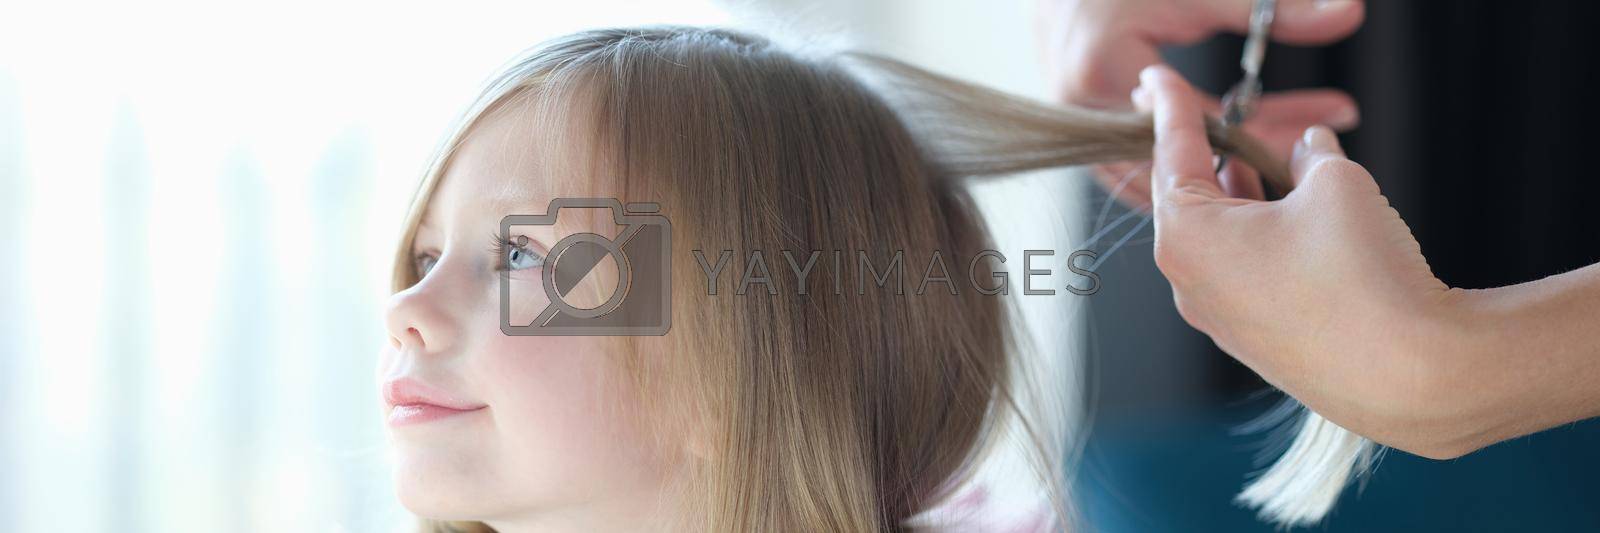 Hairdresser cutting hair of little girl in beauty salon. Hairdressing services for children concept